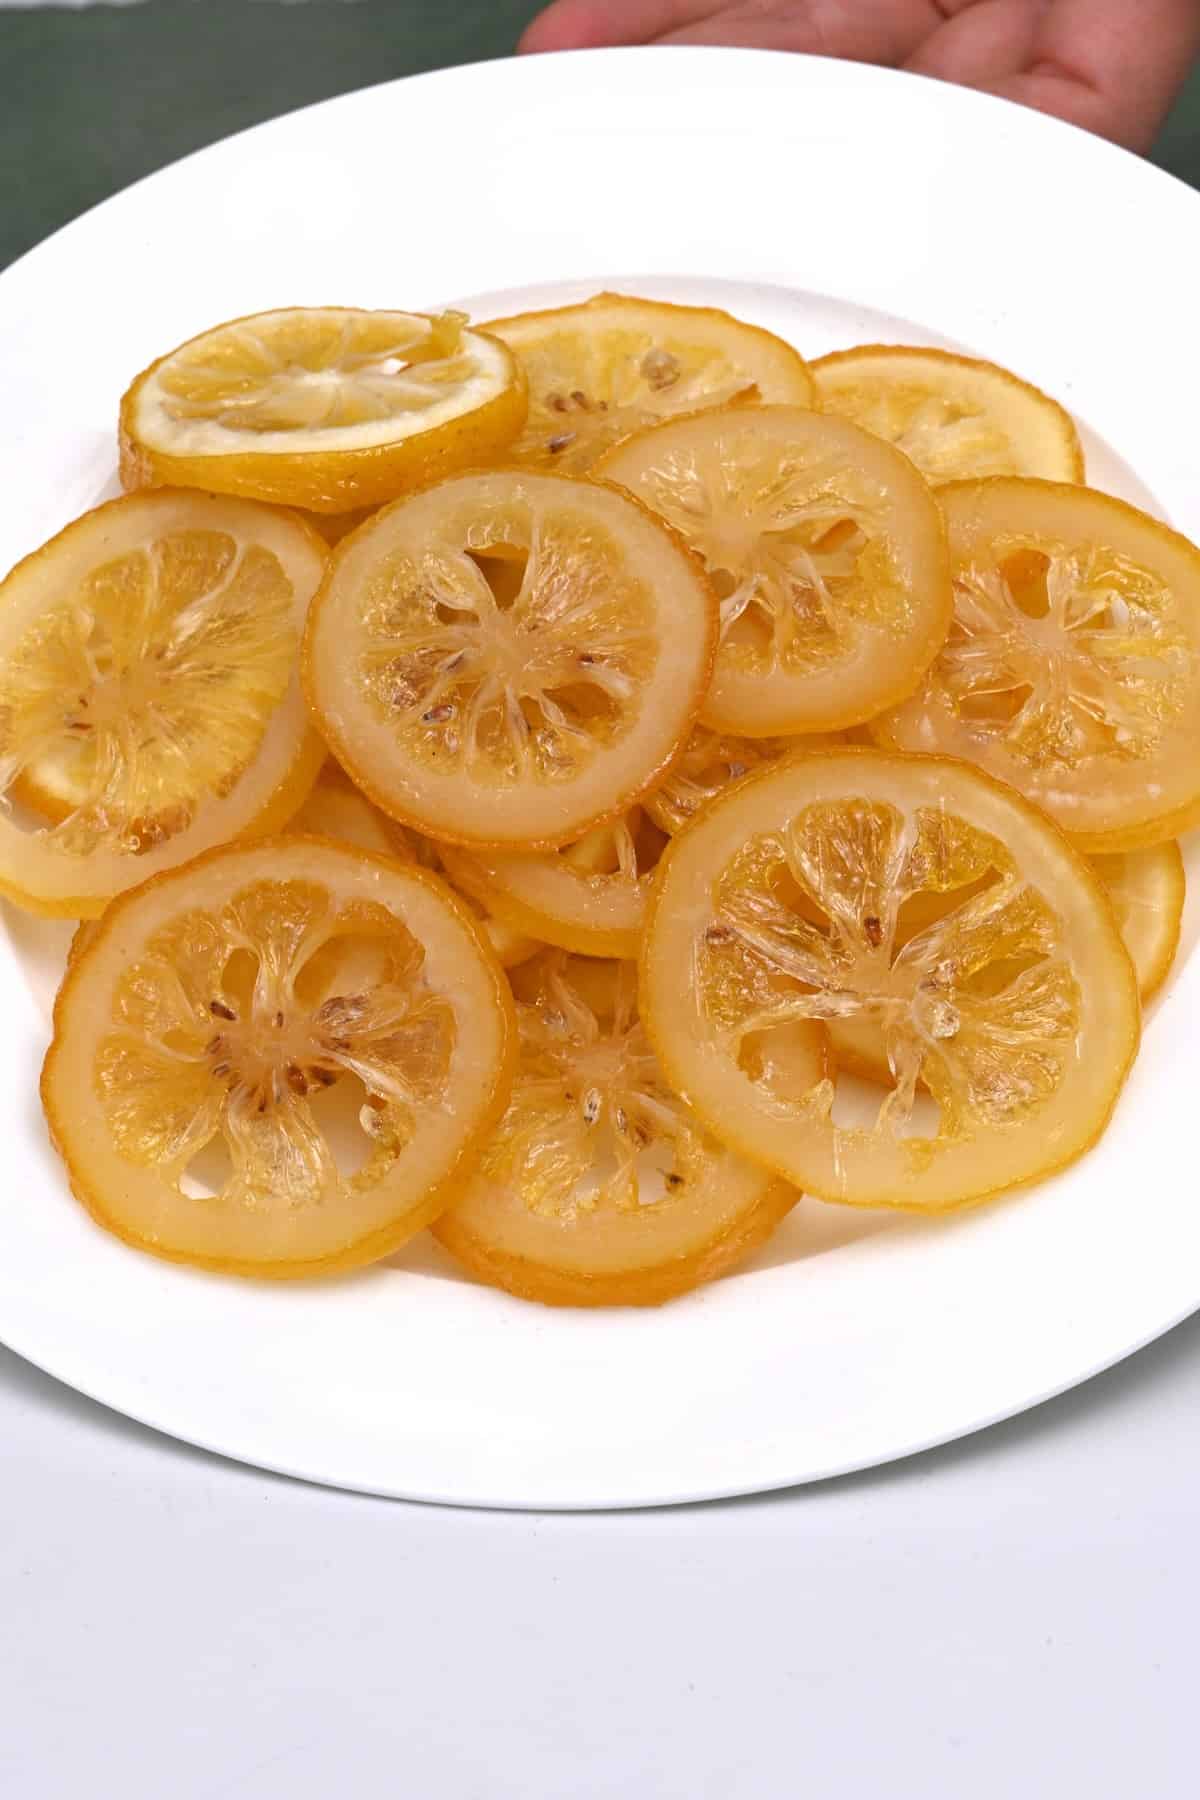 Candied lemon slices stacked on a plate